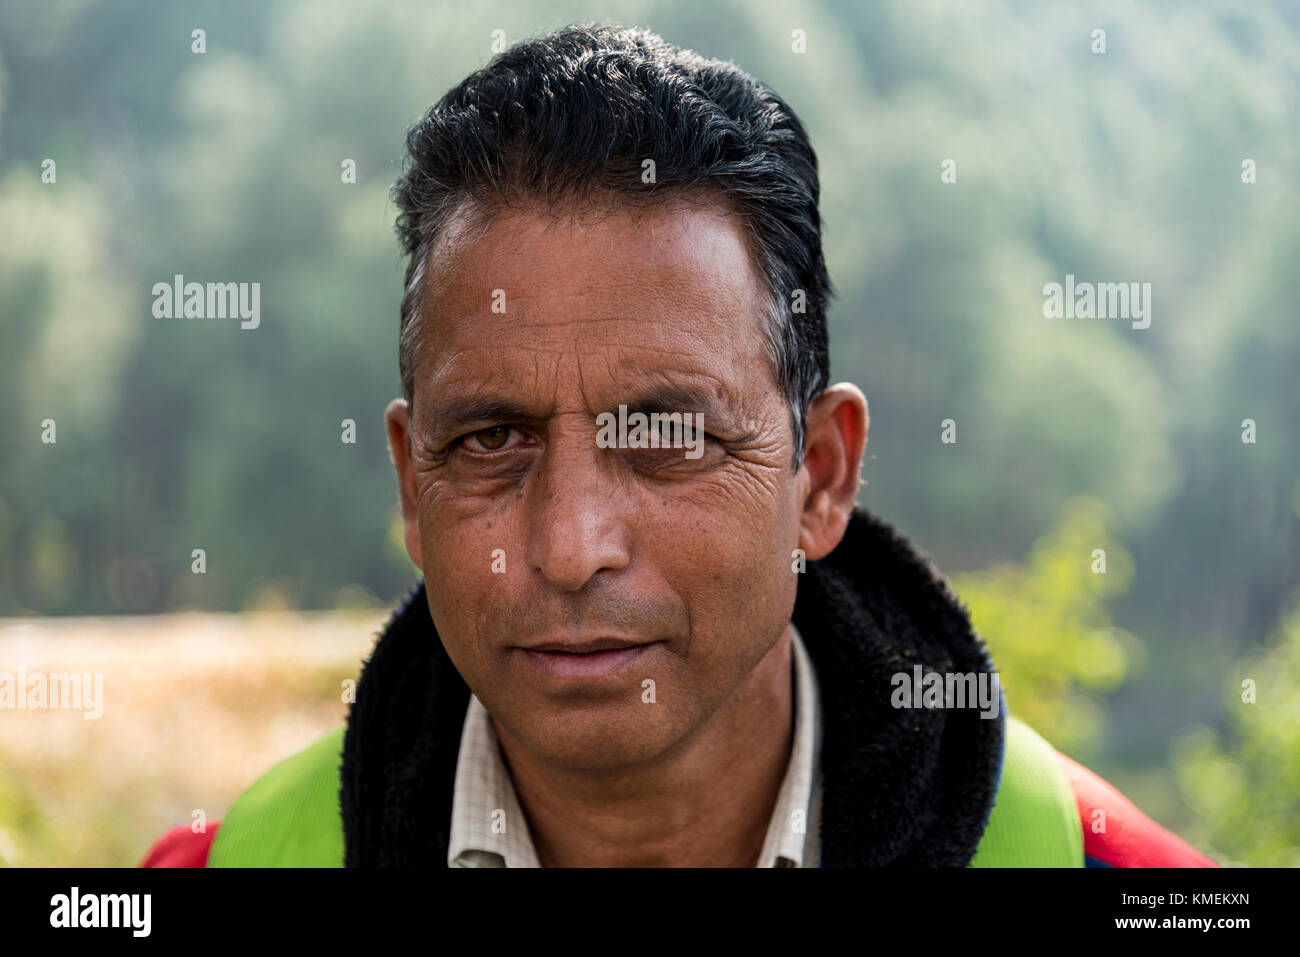 Portrait of a poor Indian man giving a serious expression. Stock Photo